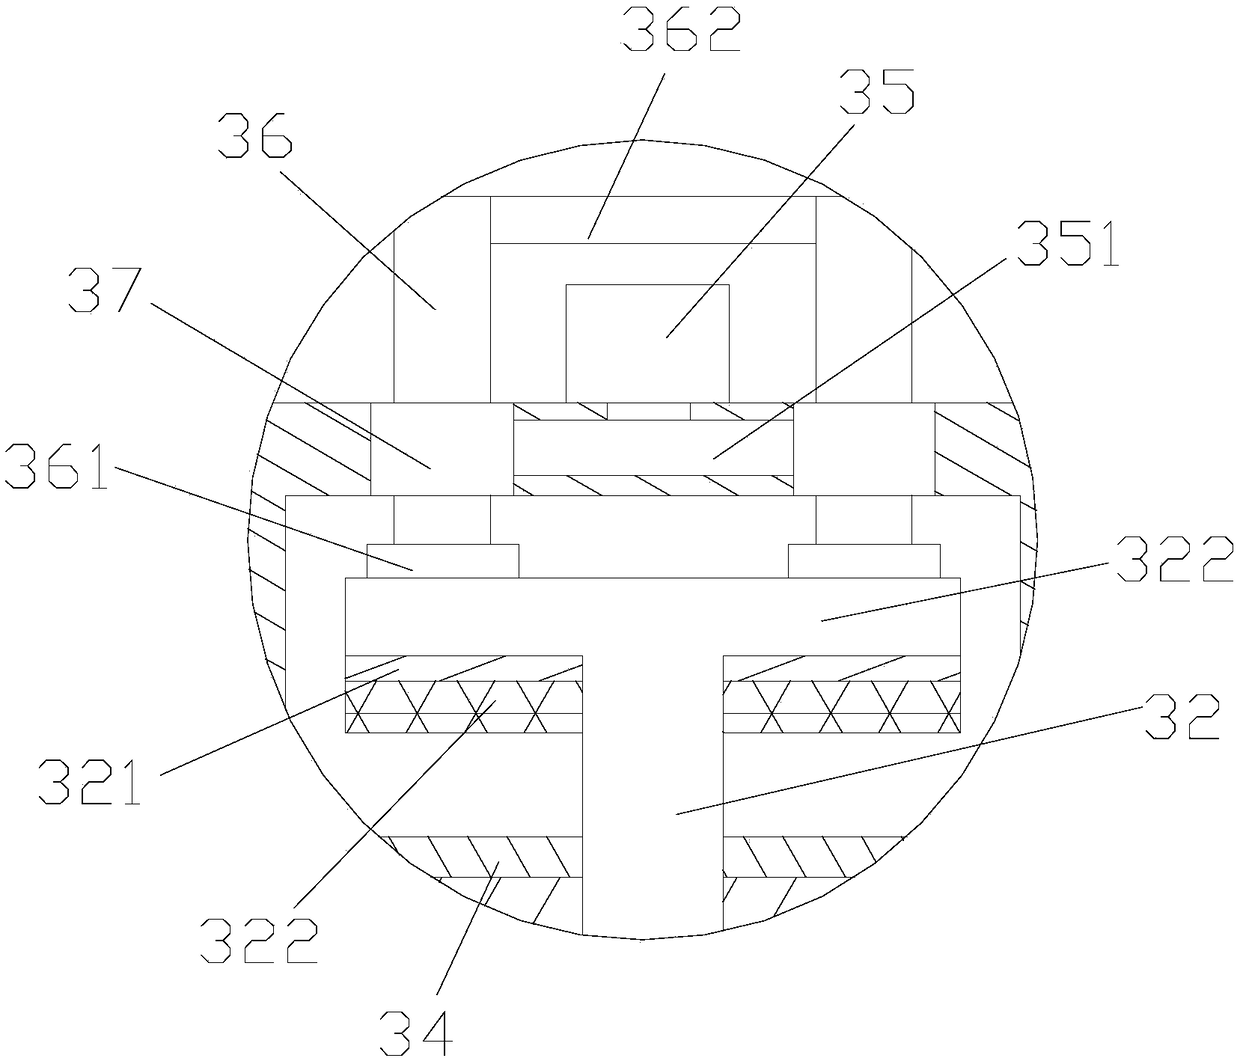 Water-cooling motor housing sealing inspecting equipment capable of conveniently fixing motor housing